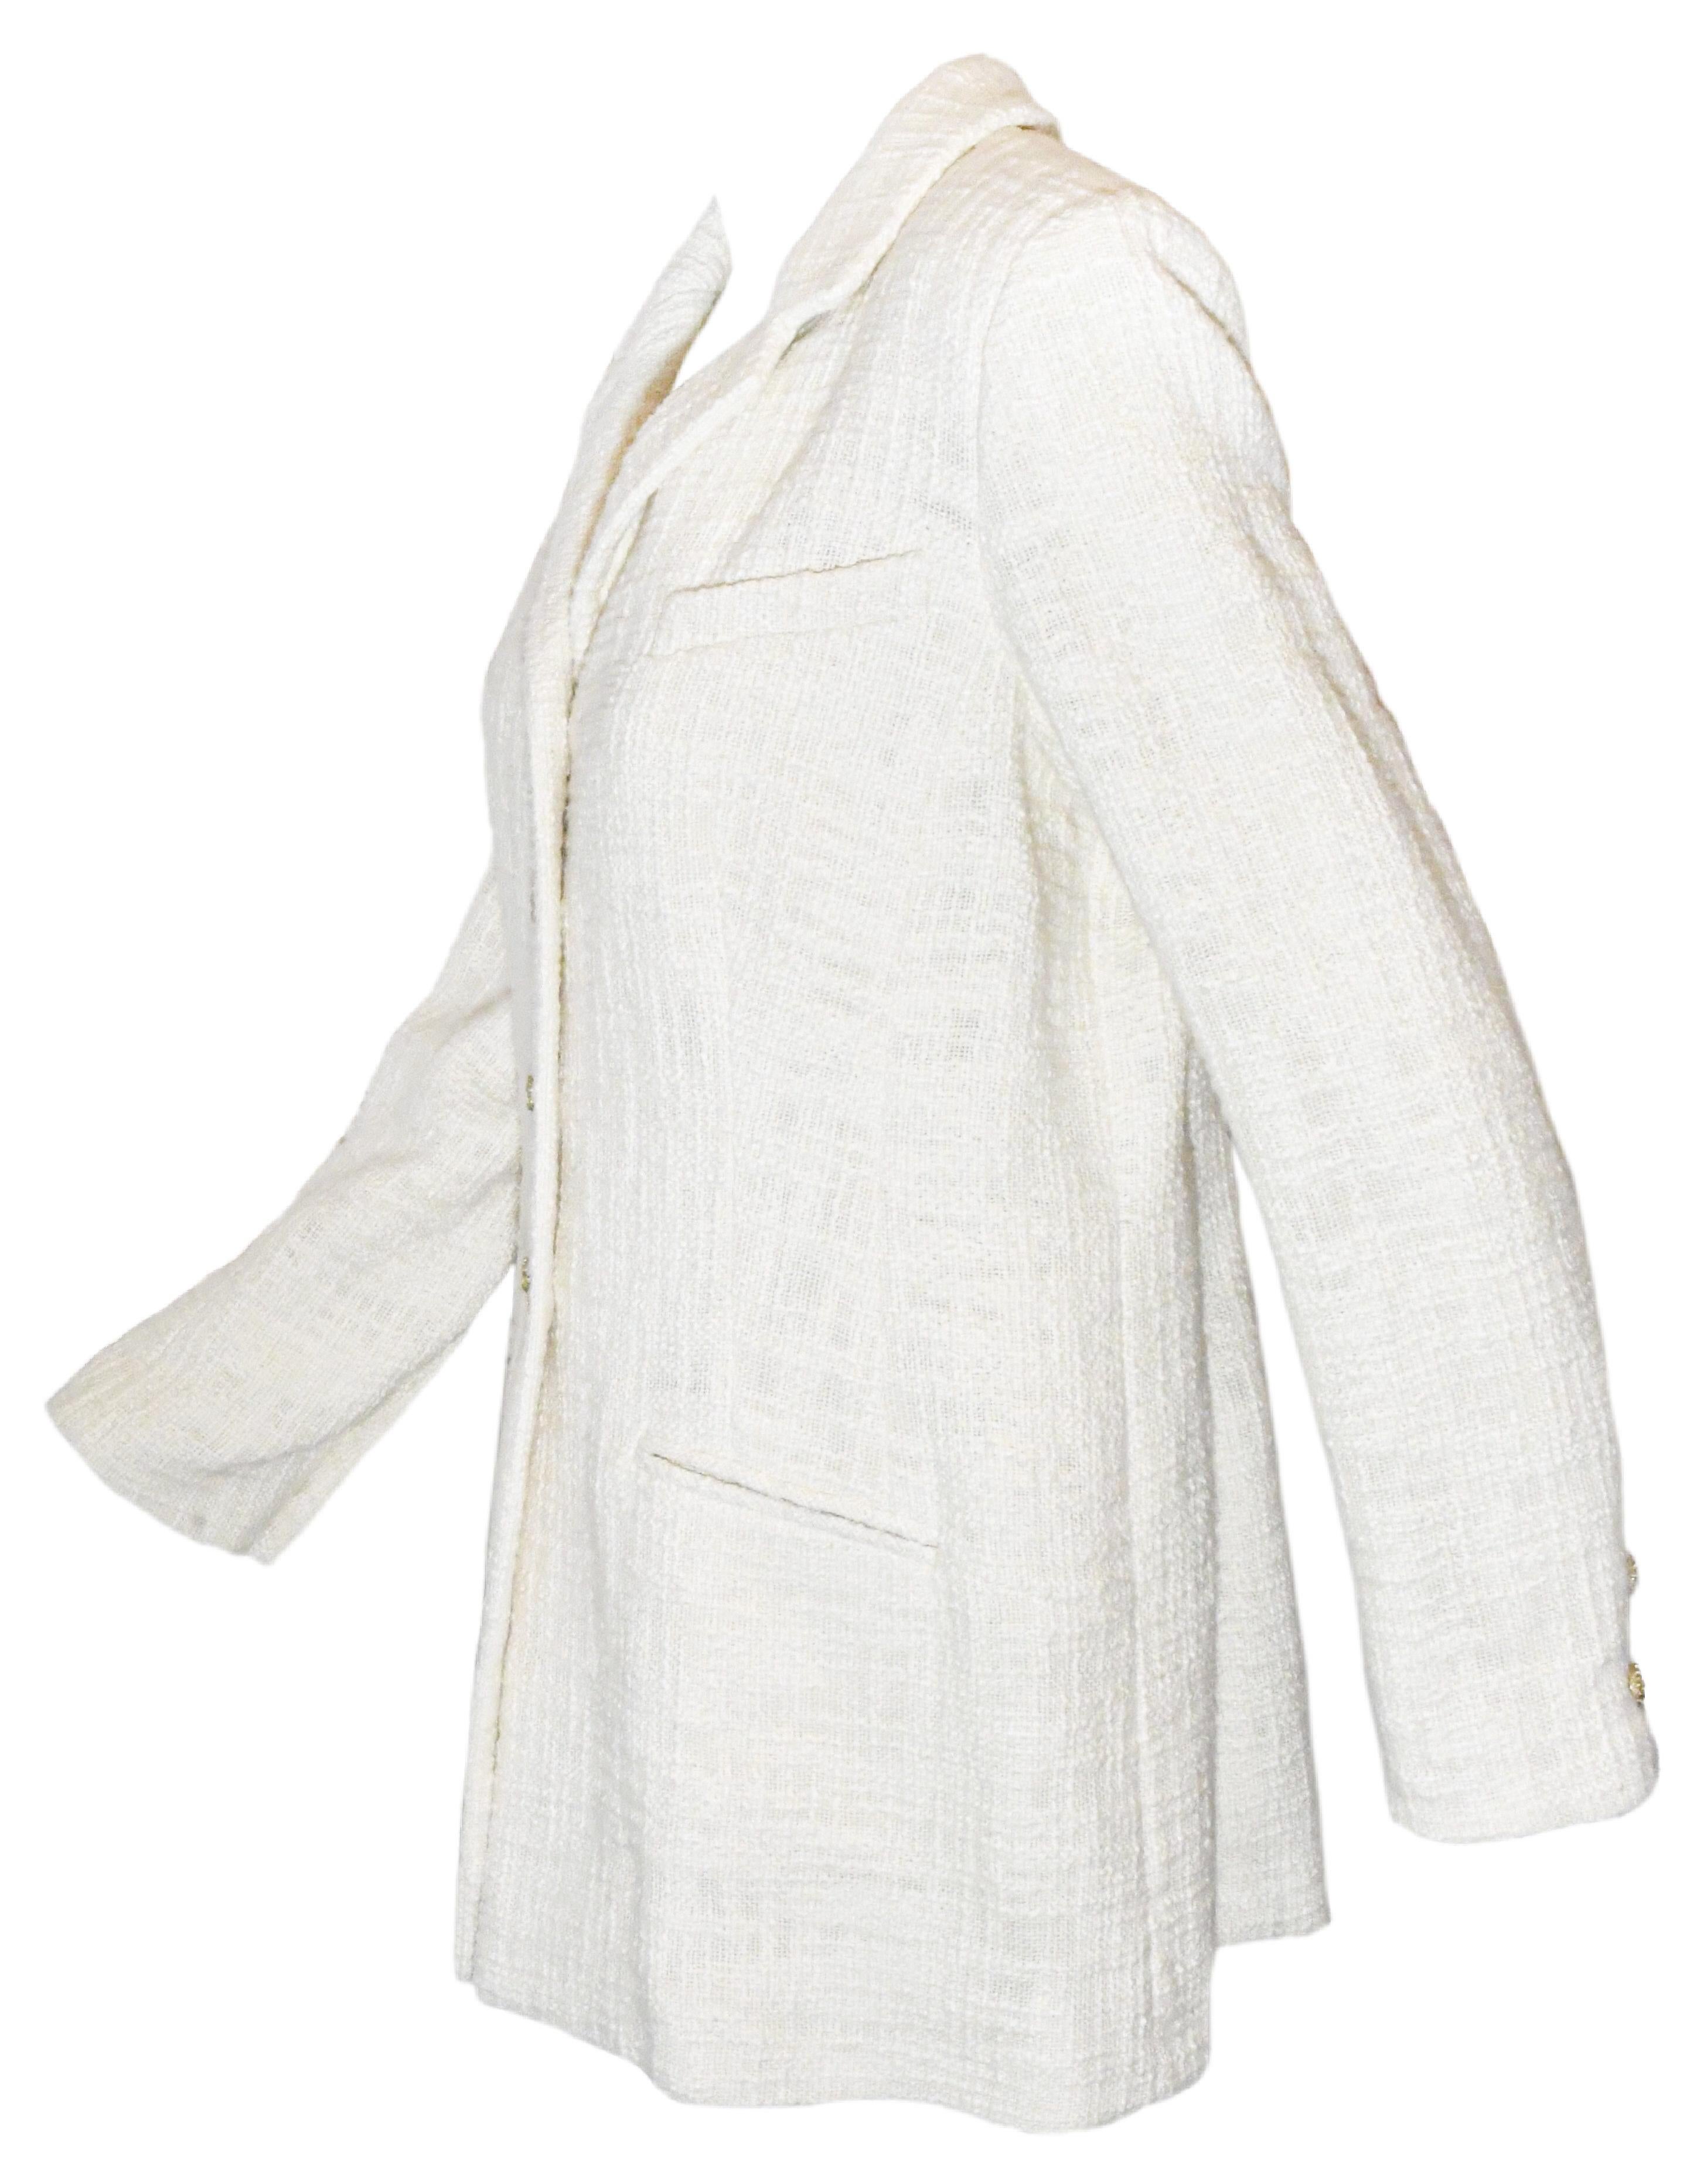 Chanel Ivory cotton tweed jacket includes, at front, for closure 4 Camellia Gripoix gold tone buttons.  This notch collar, single breasted jacket incorporates 2 faux side slit pockets and one faux chest pocket.  It is lined in ivory silk Camellia